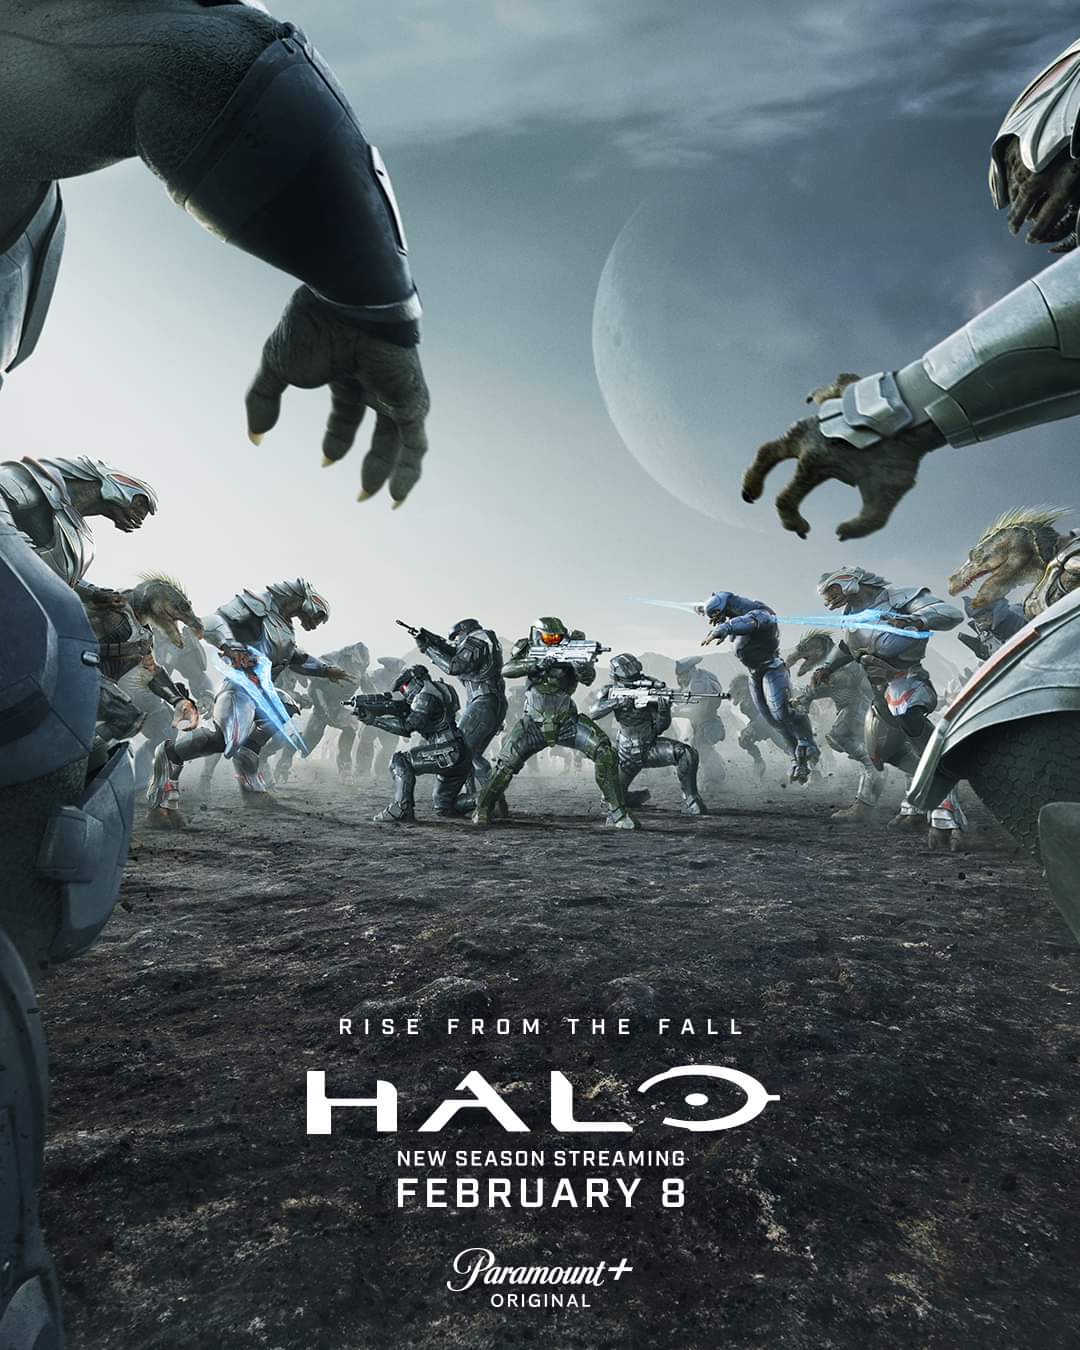 Elites and Spartans clash Halo Season 2 will show the fall of Reach!